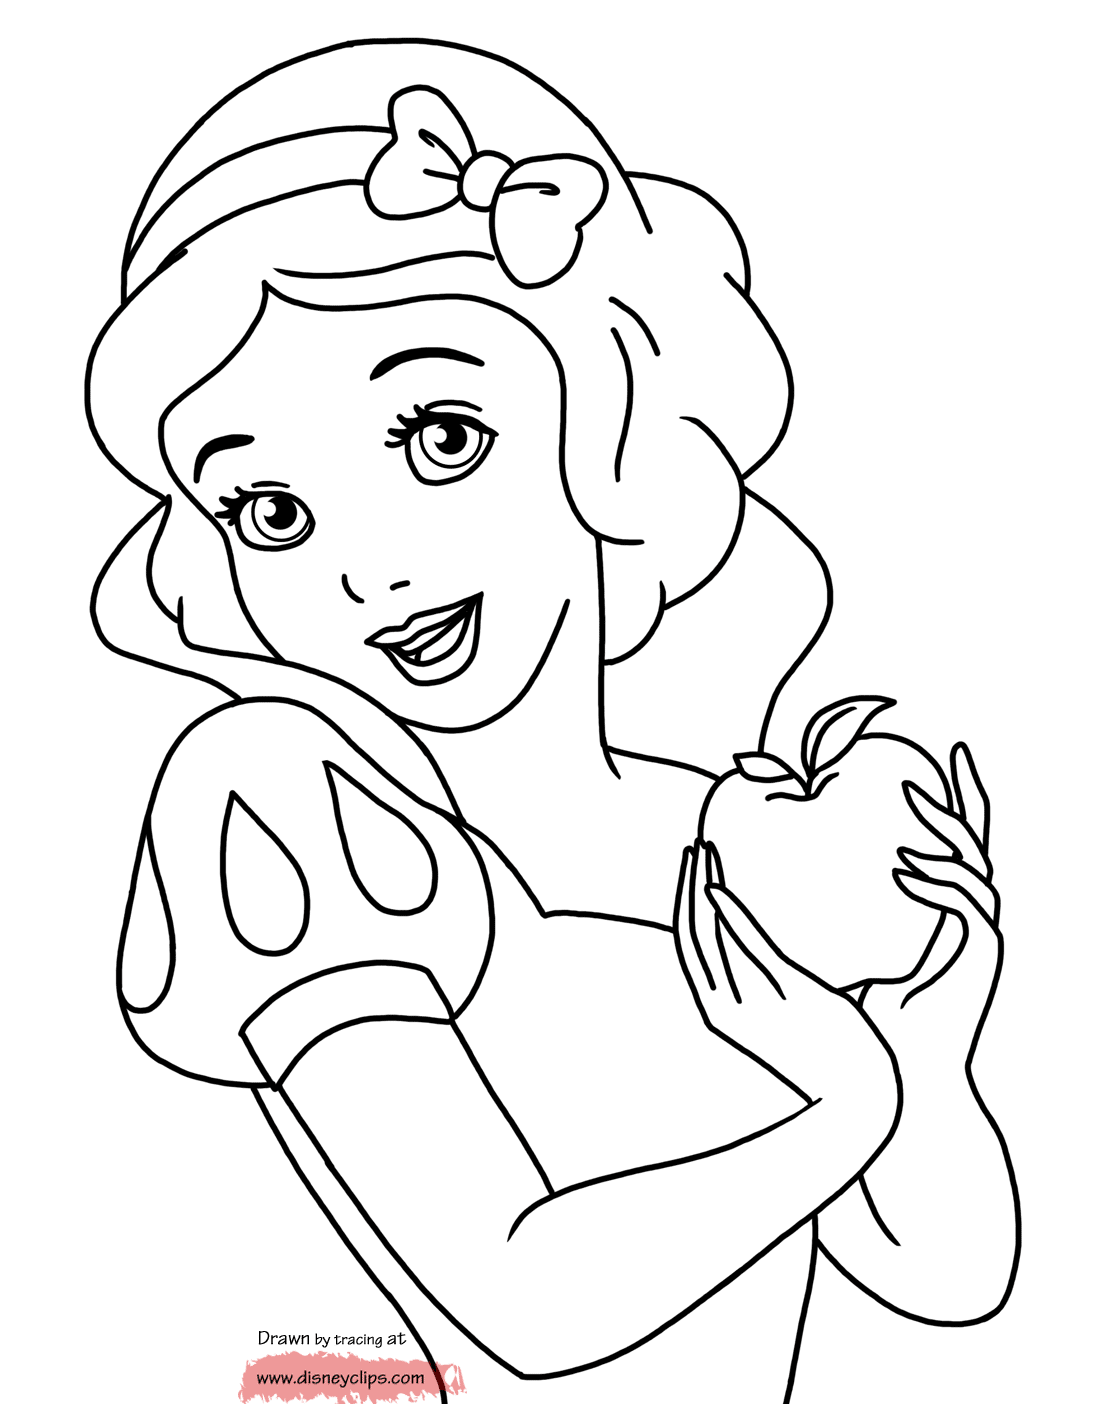 Snow White and the Seven Dwarfs Coloring Pages   Disneyclips.com